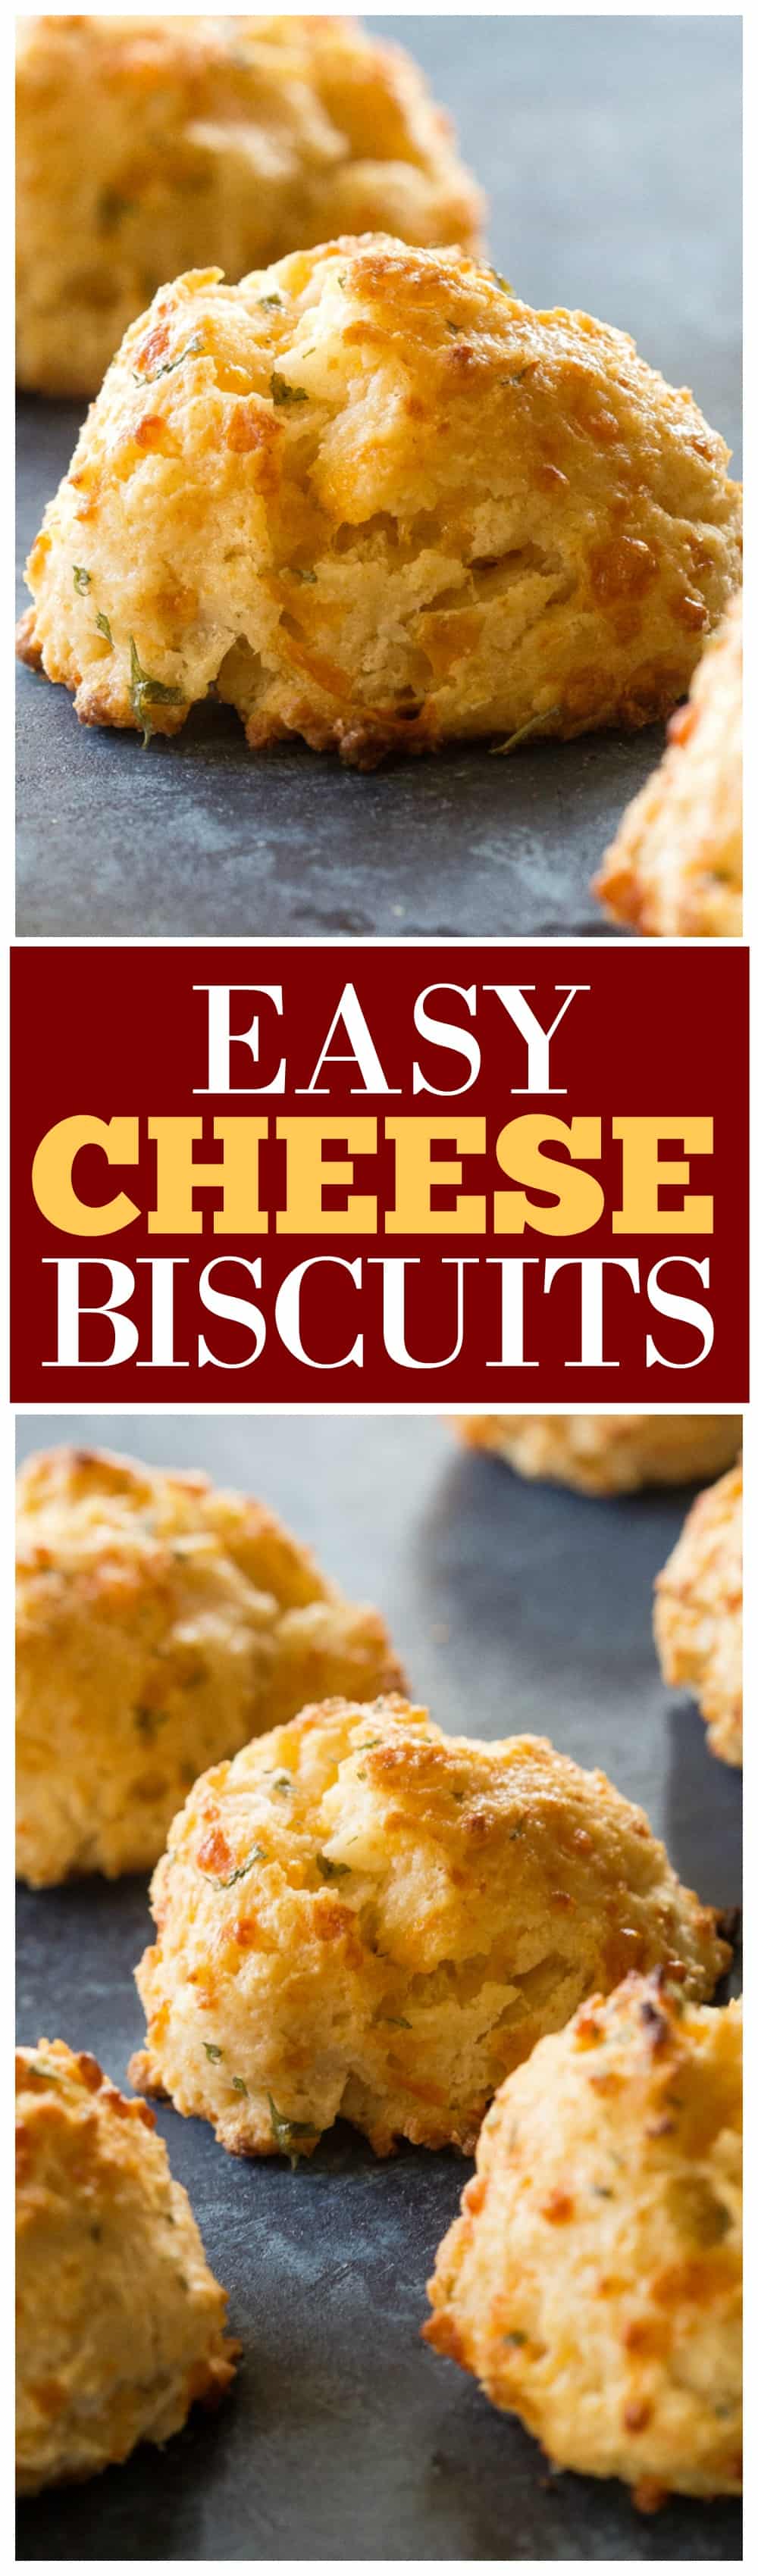 Cheese Biscuits on a plate